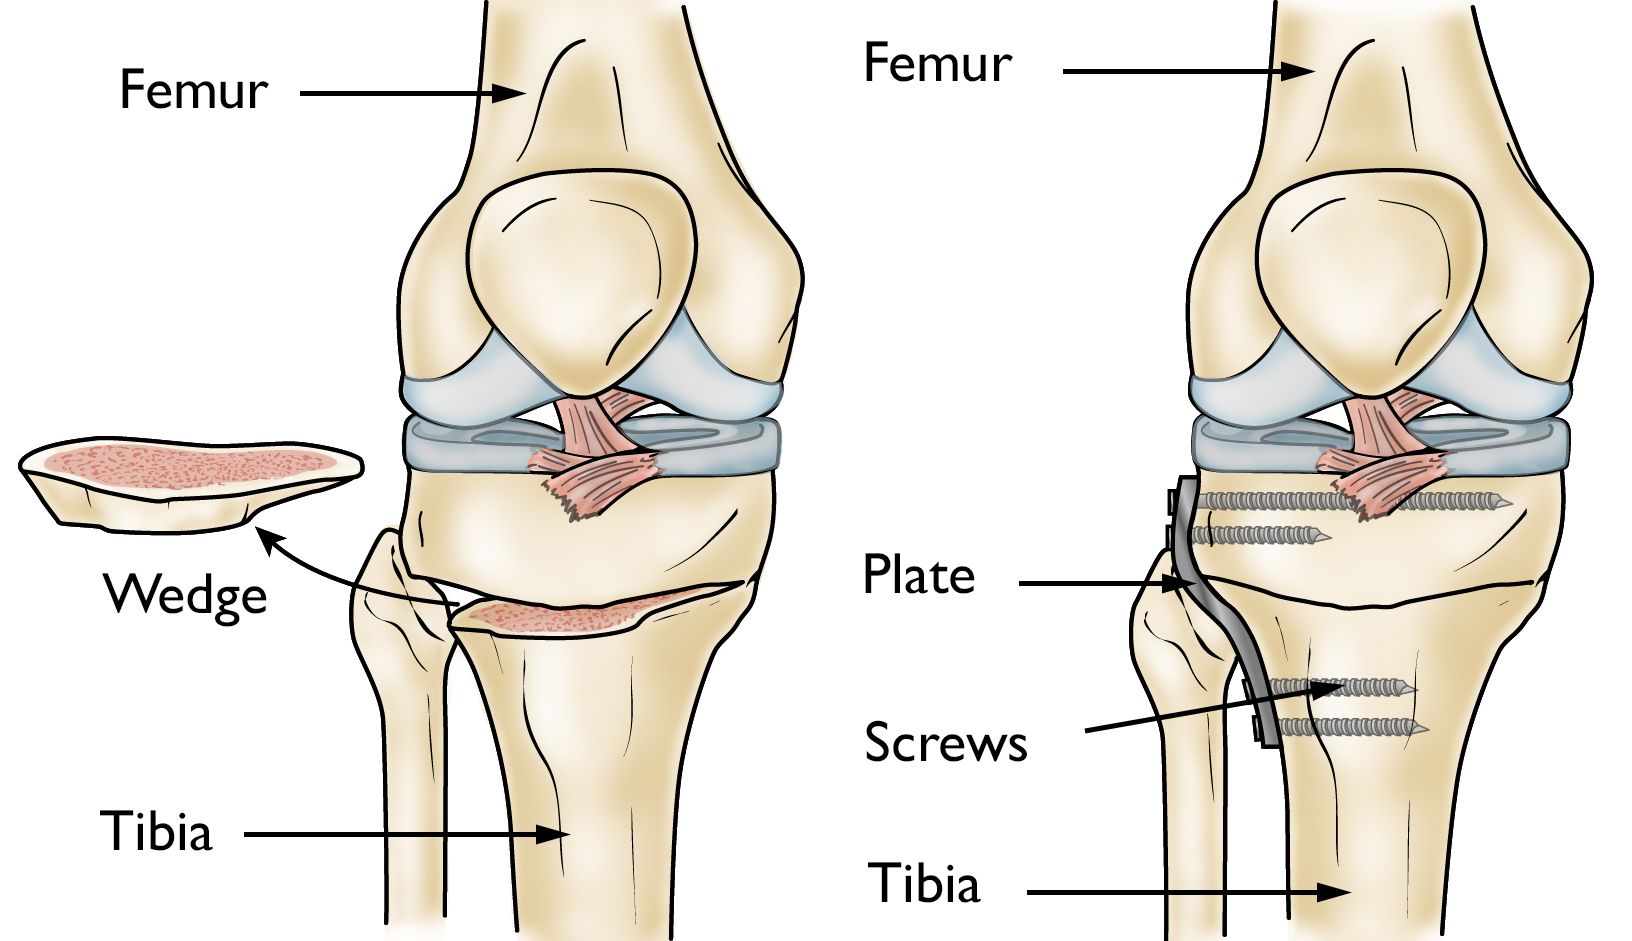 Osteotomy of the knee